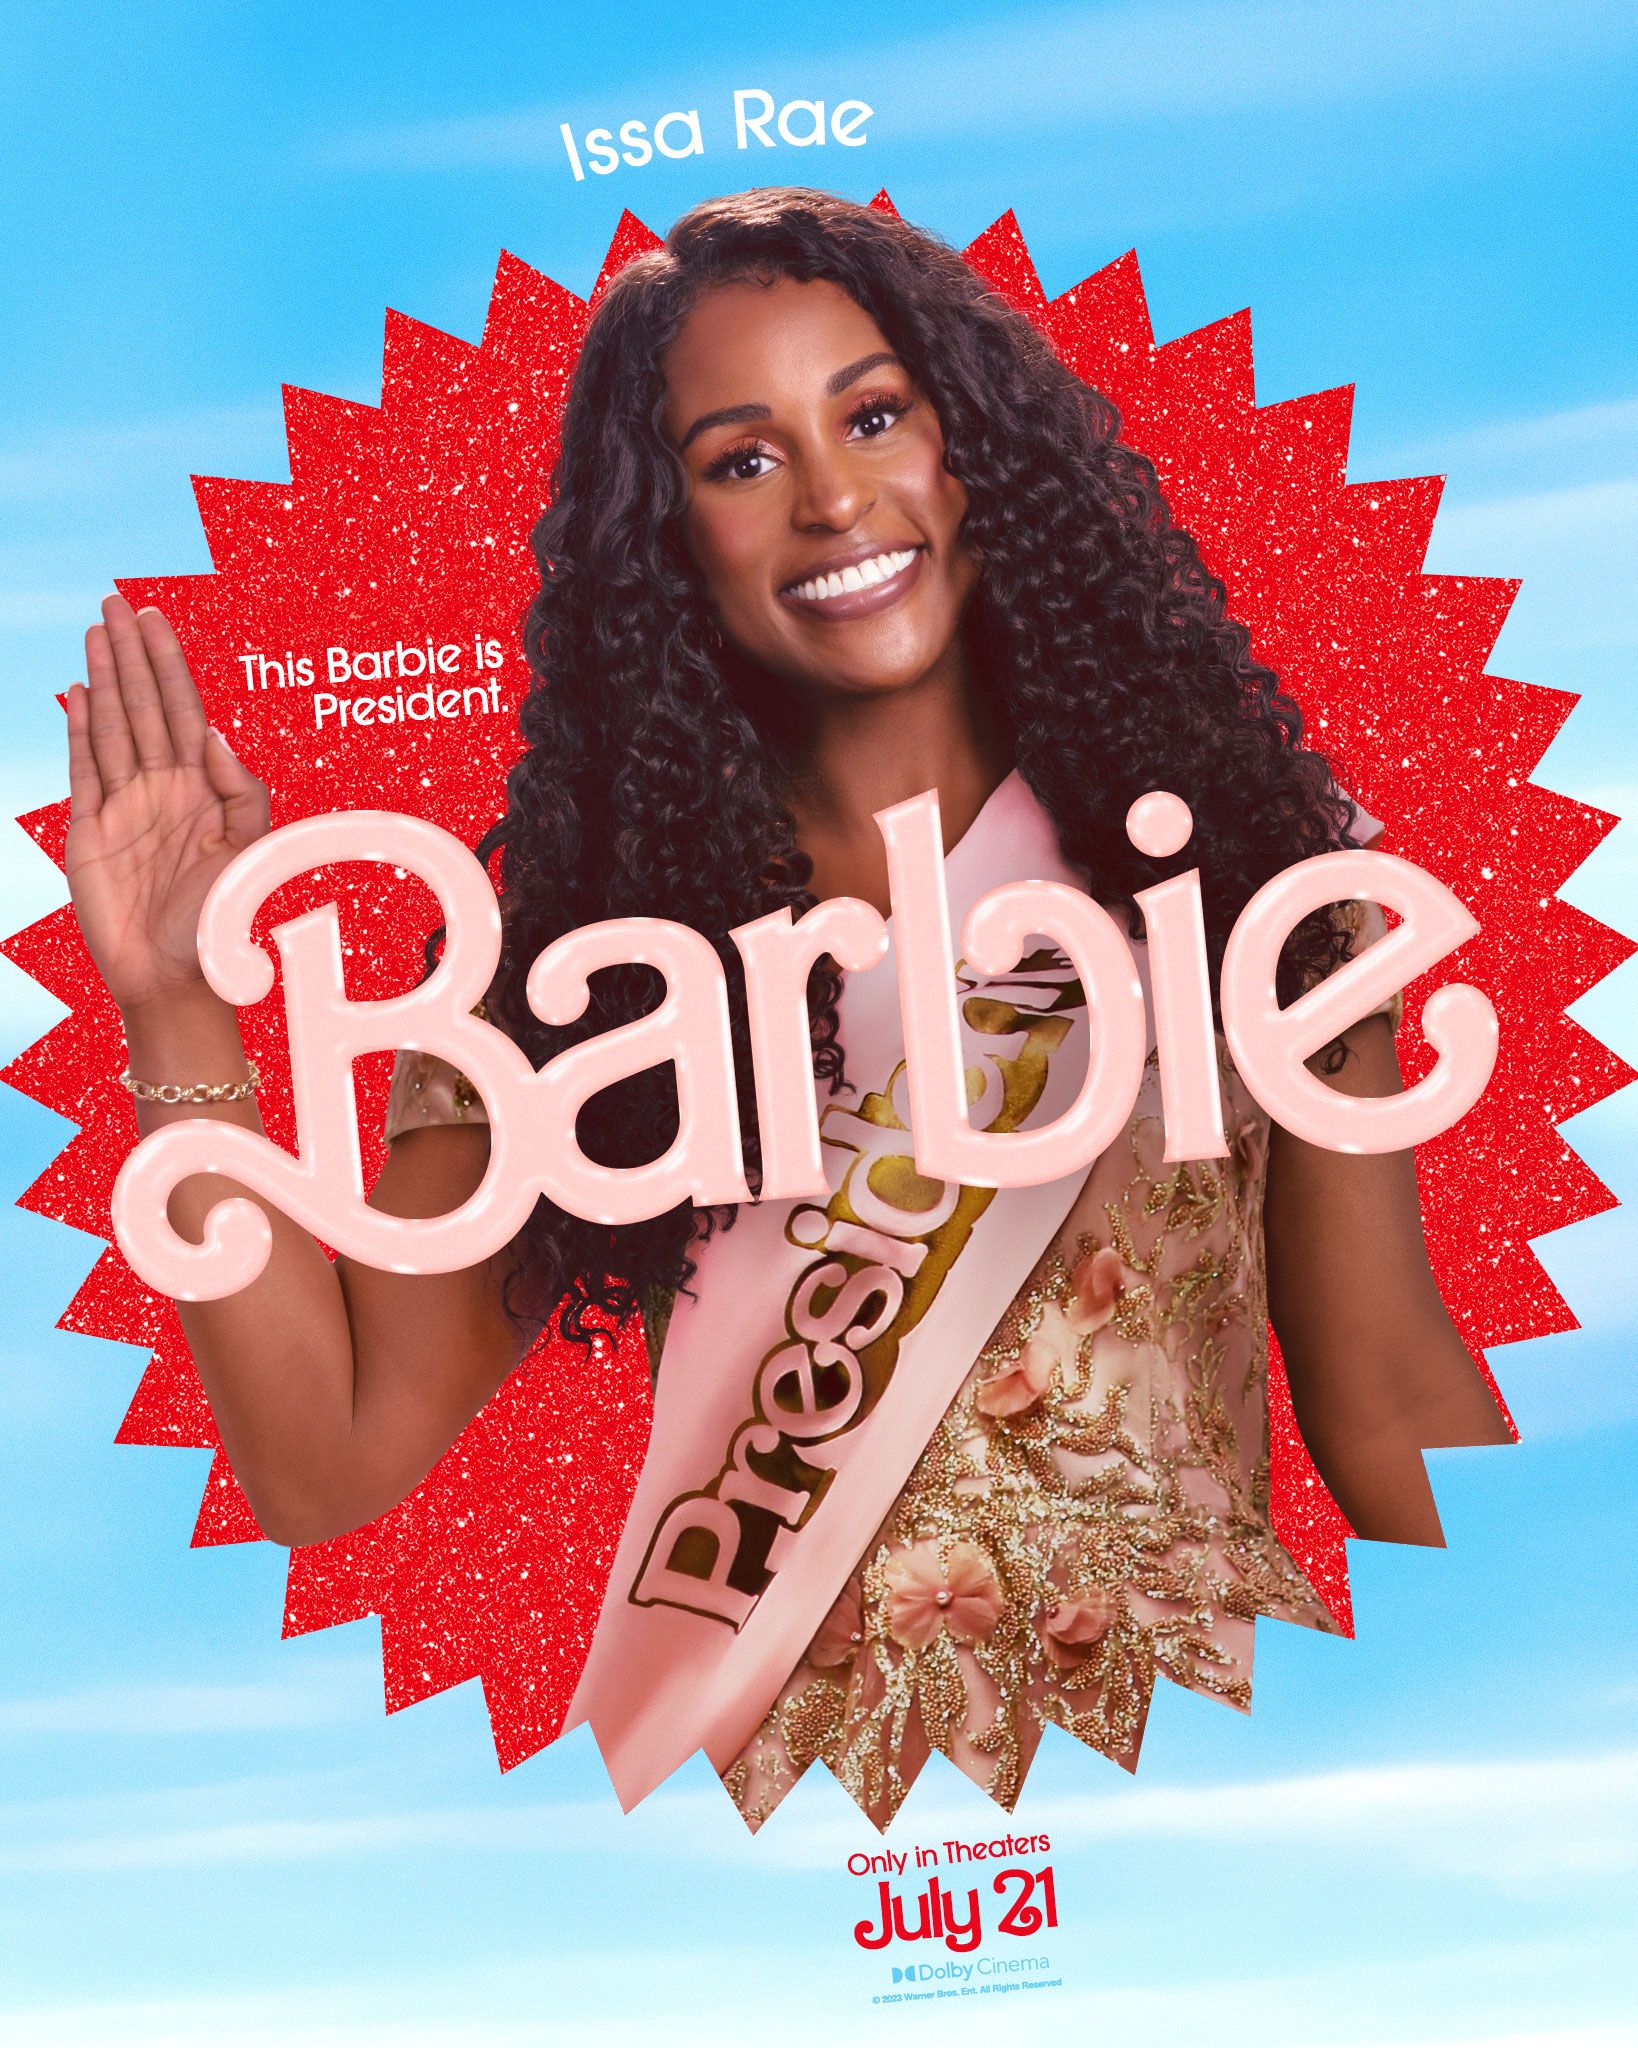 New Character Posters & Trailer Just Released For The ‘Barbie’ Movie